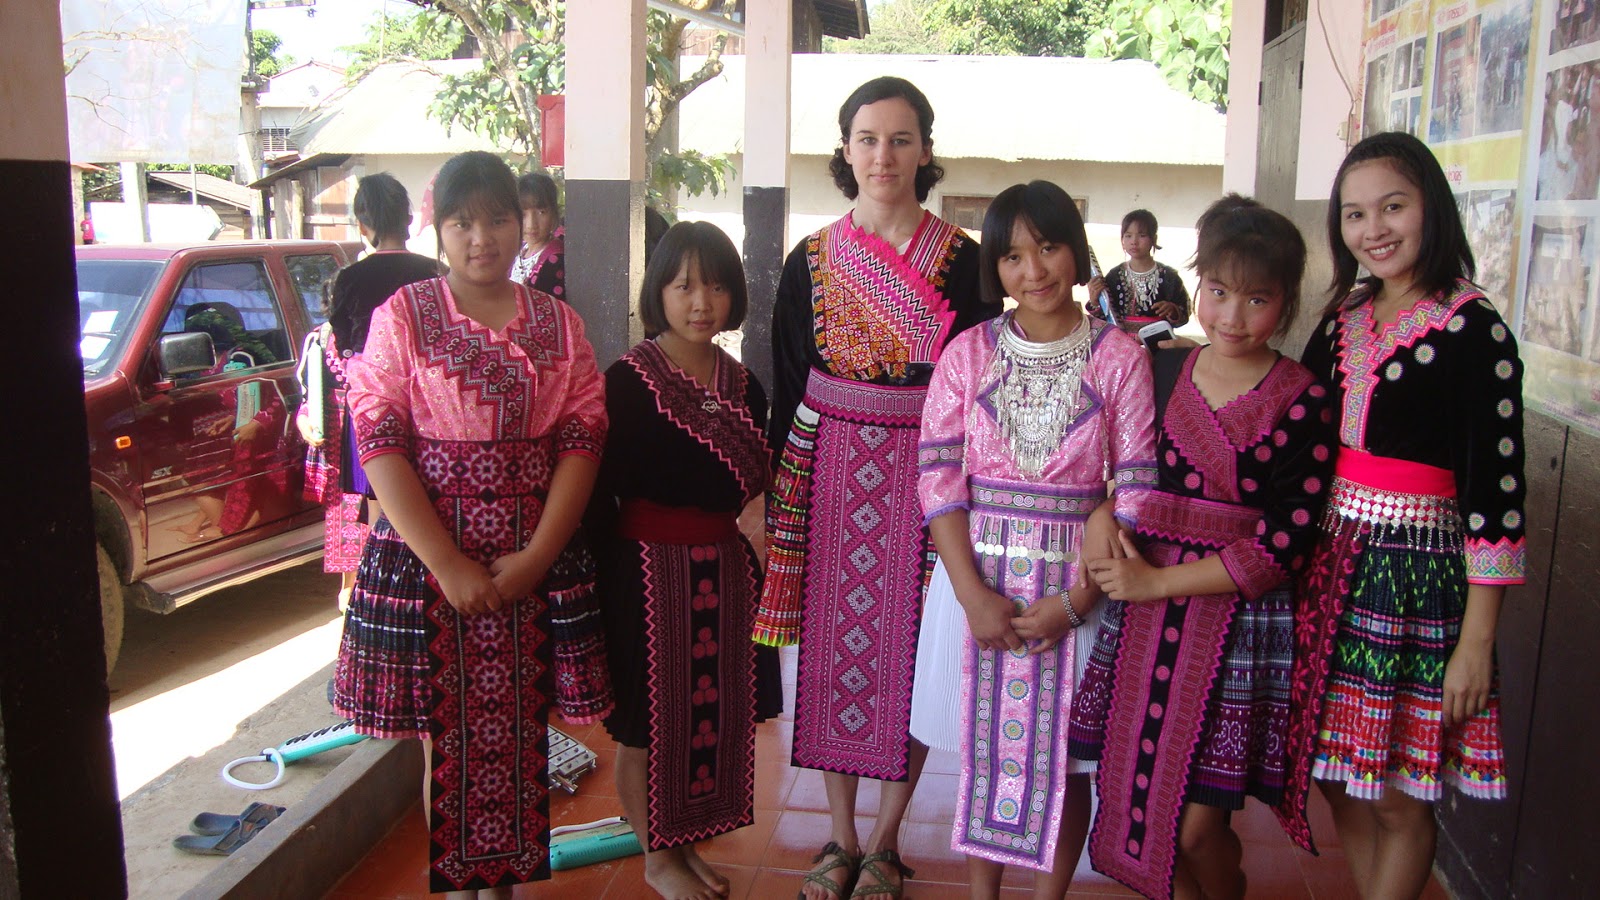 Hmong New Year Clothes